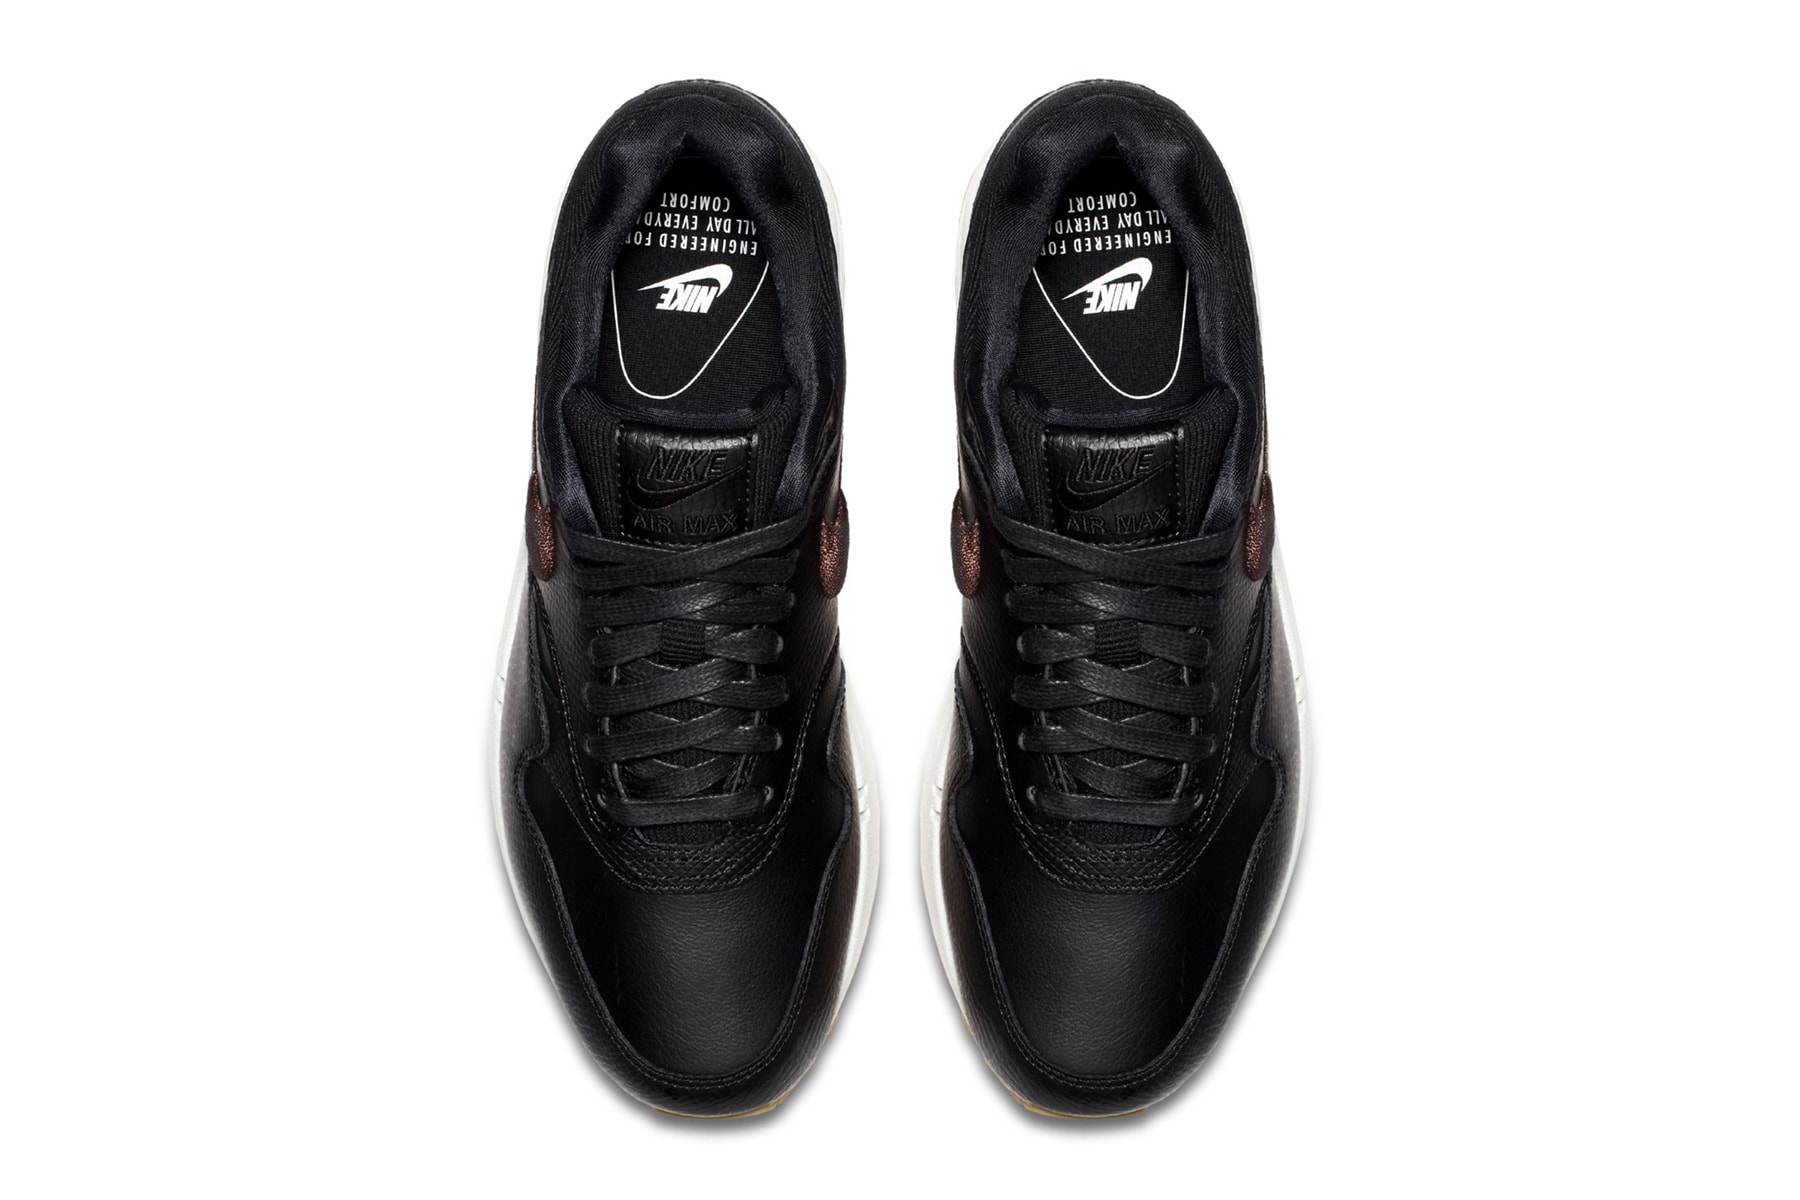 Nike Air Max 1 Premium Black Leather Bronze embroidery release date price sneaker